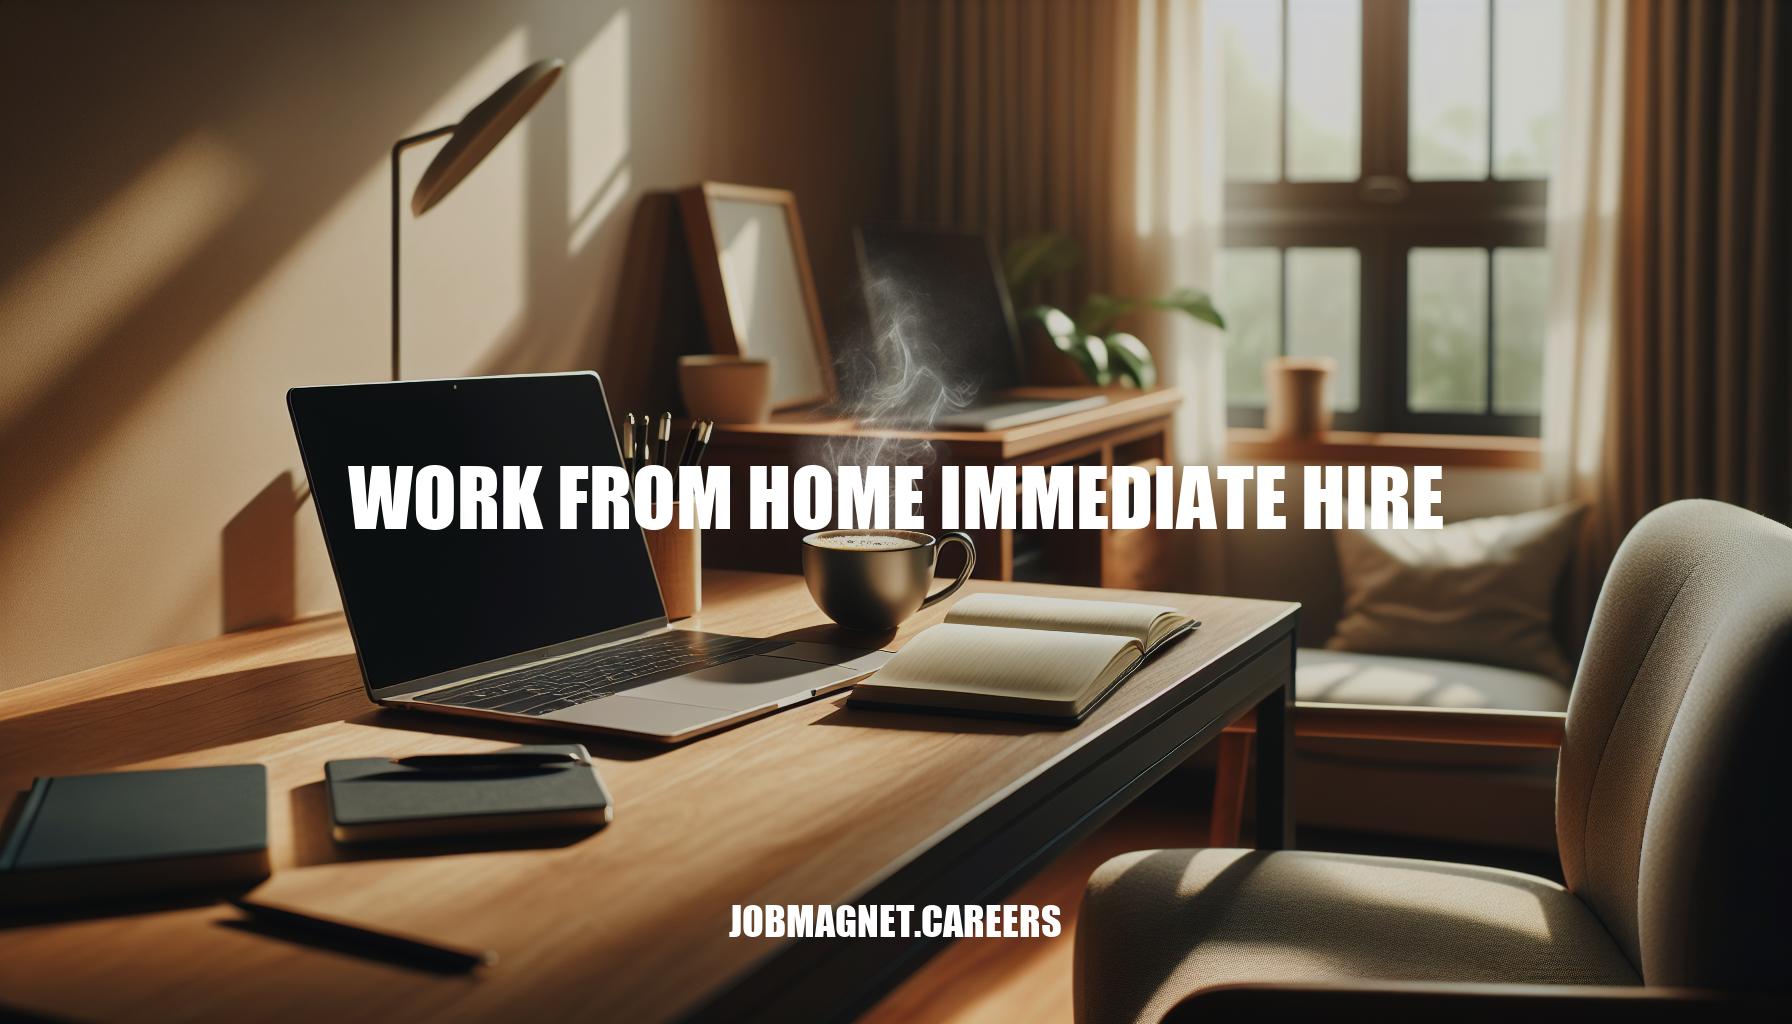 Work From Home Immediate Hire: Opportunities and Tips for Remote Job Seekers